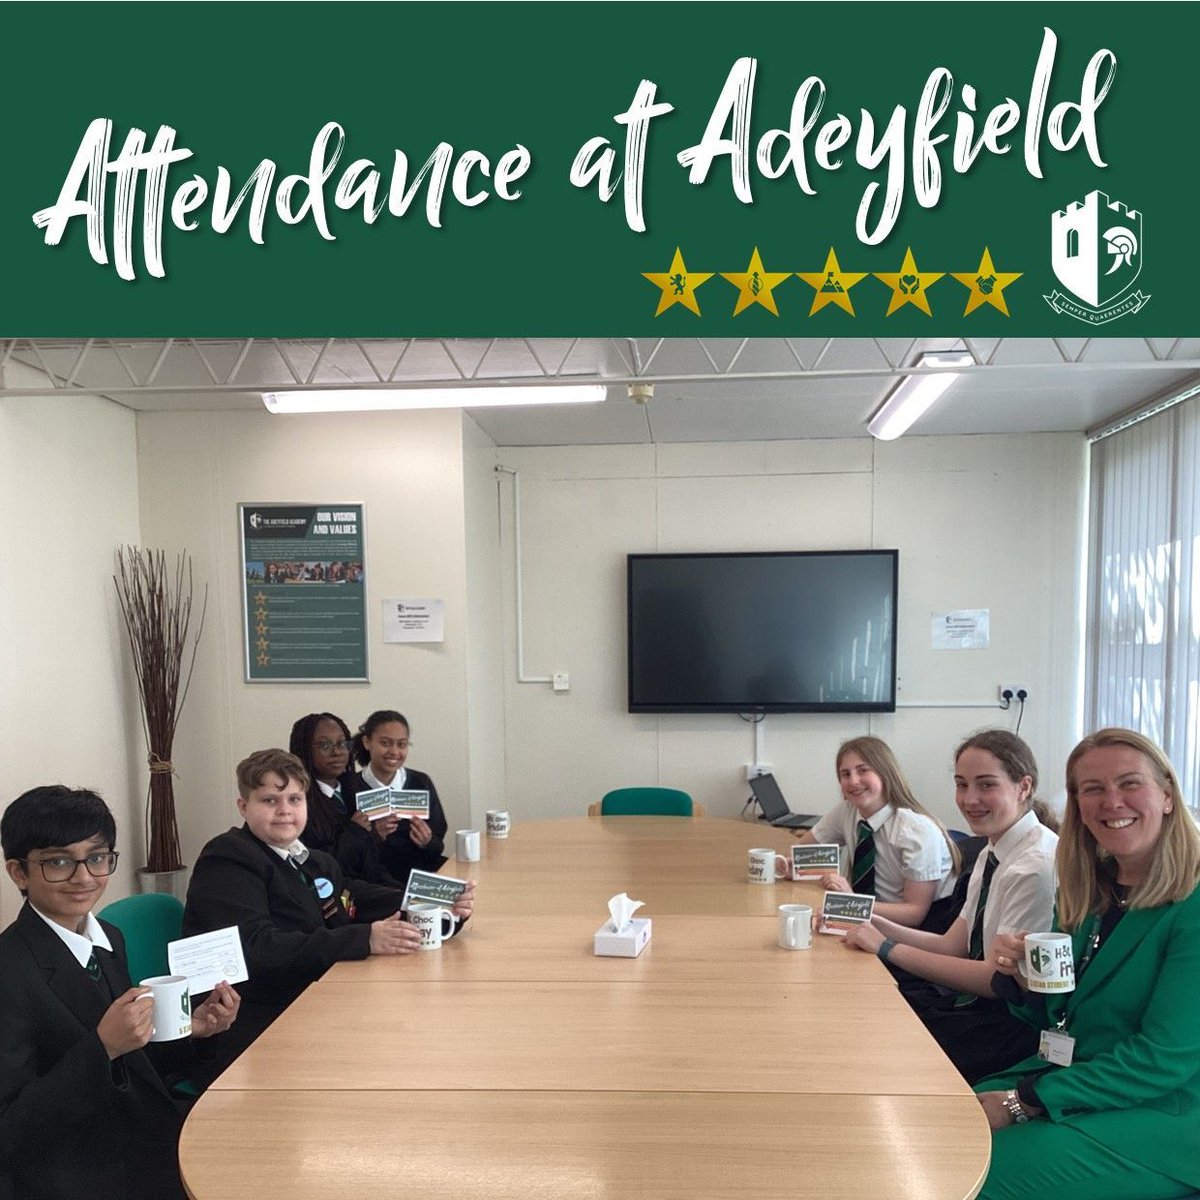 Congratulations to all the students who were rewarded with hot chocolate from Miss Mason today and joined her in recognising their attendance accomplishments having either maintained 100% throughout the academic year or made a considerable improvement to their attendance.